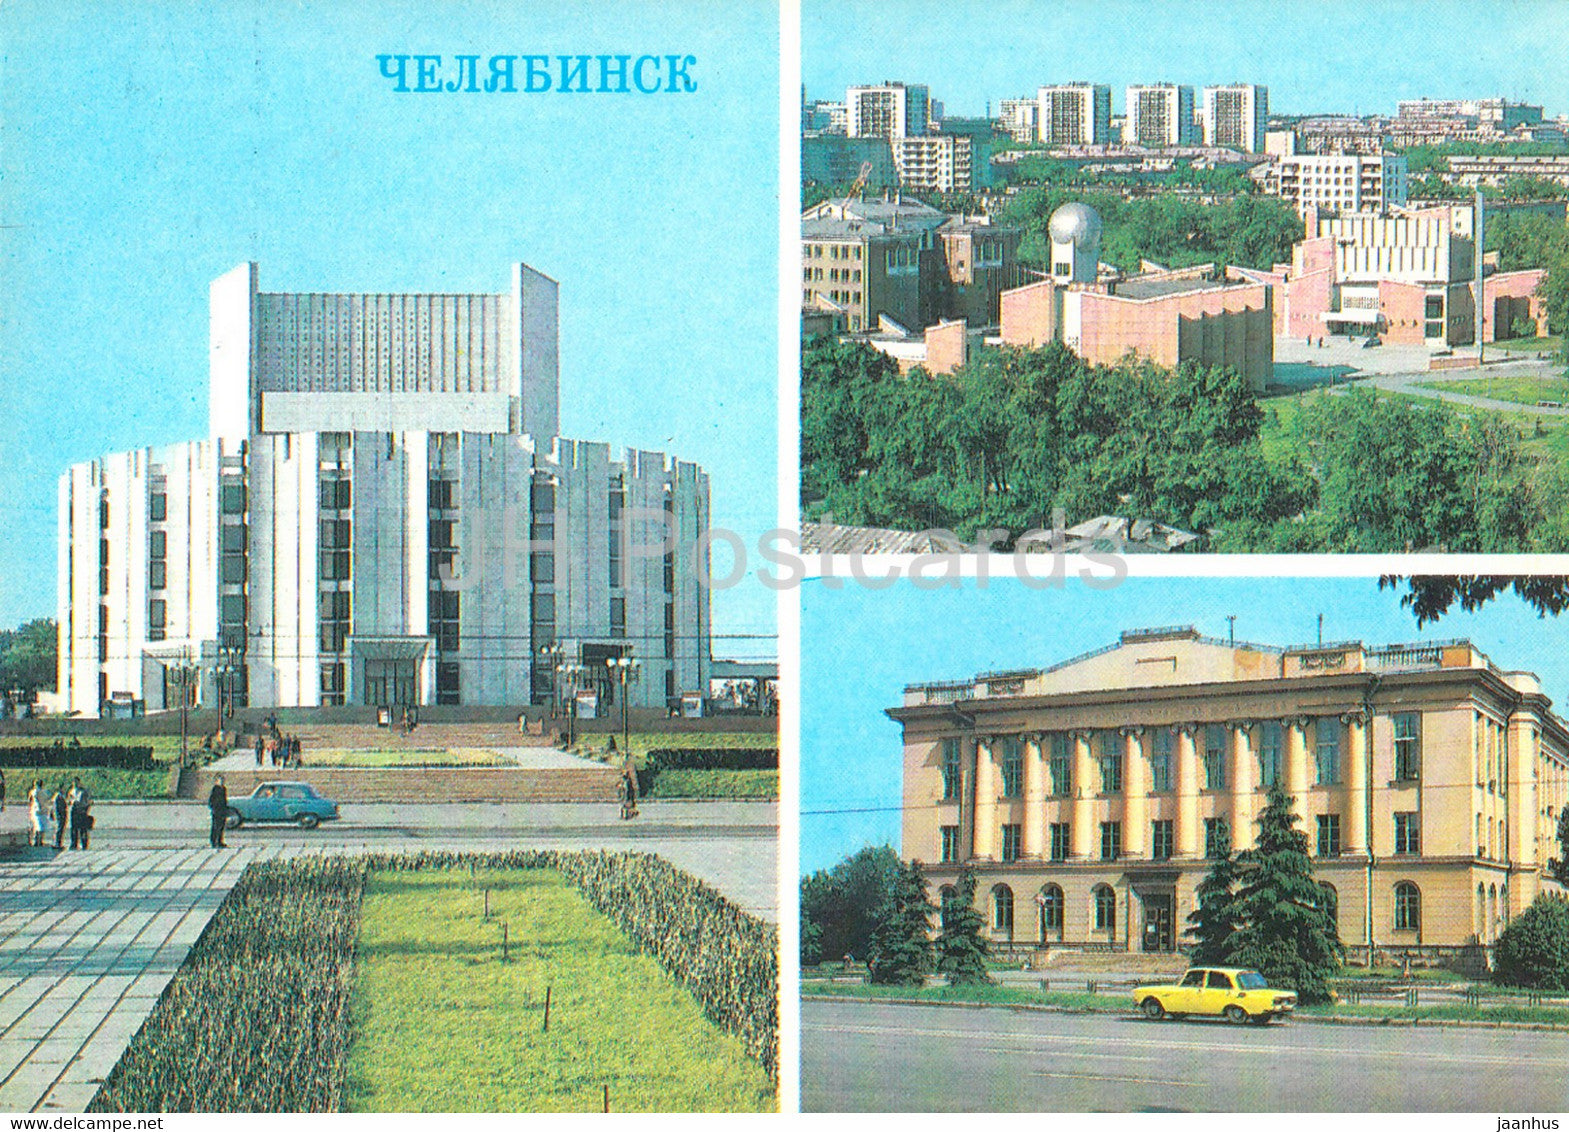 Chelyabinsk - Tsvilling Drama Theatre - Pioneer Palace - State Library - postal stationery - 1985 - Russia USSR - unused - JH Postcards